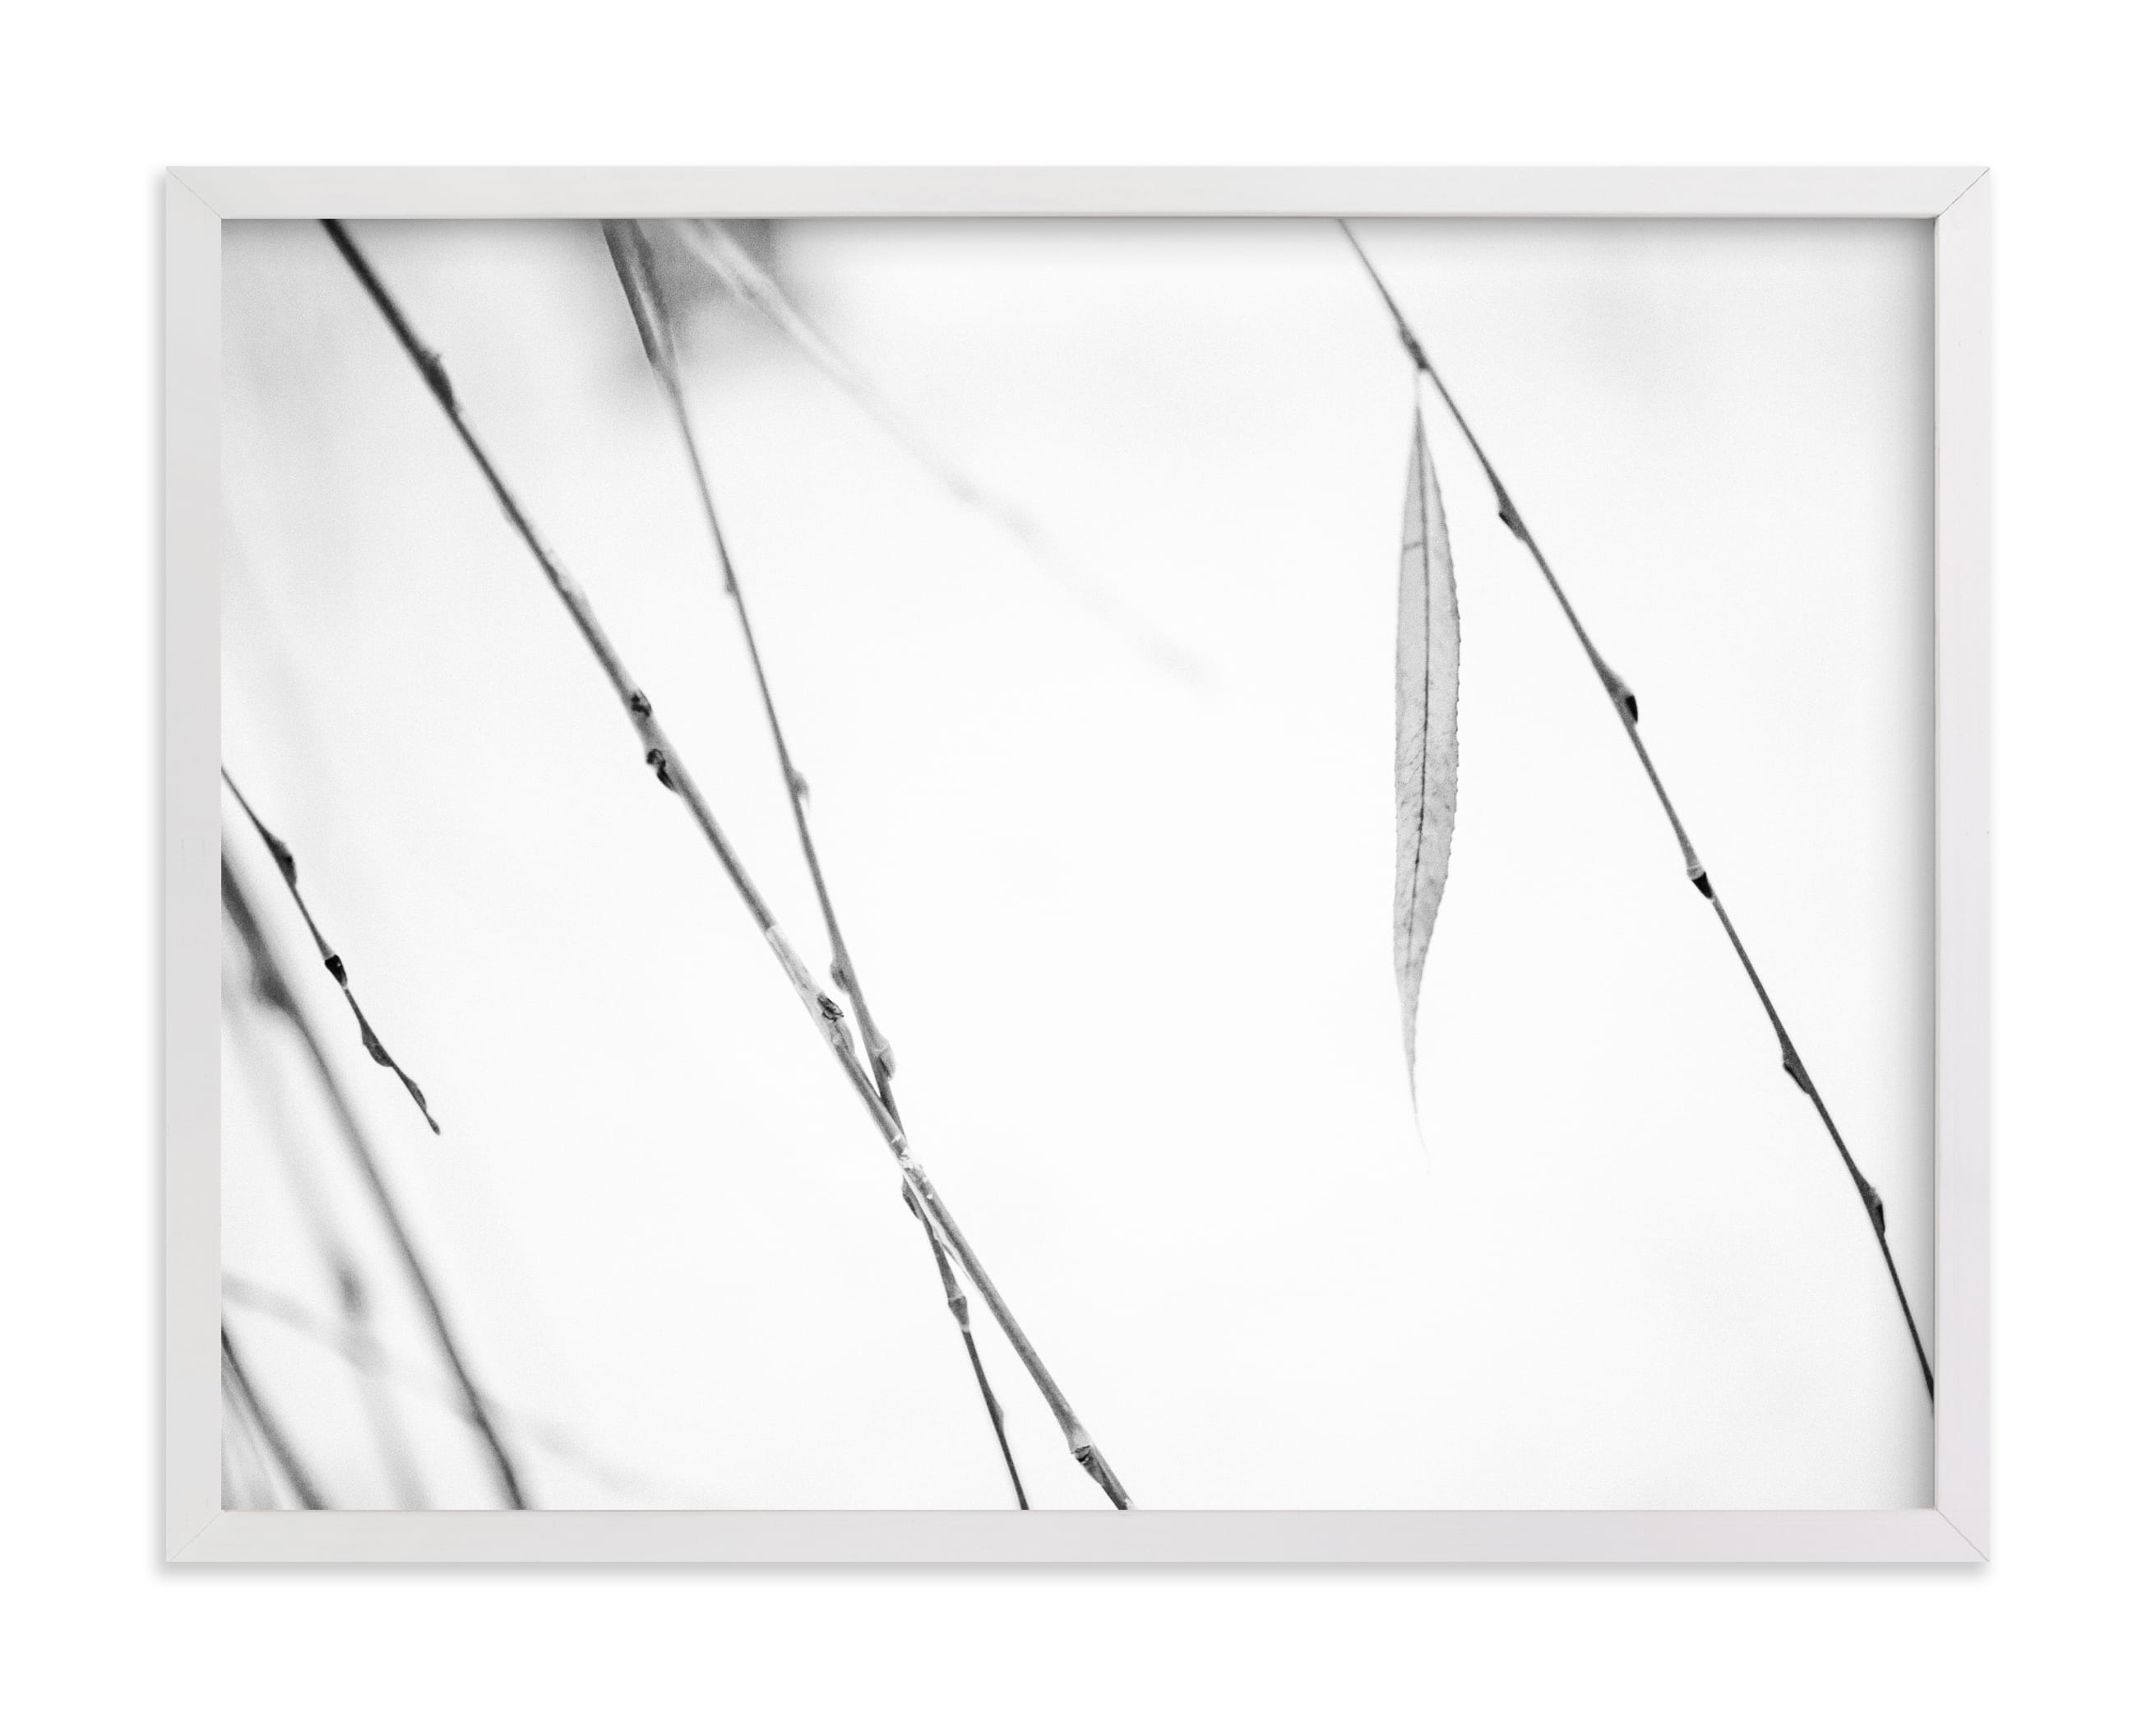 "	 CLOSER IV" by Lying on the grass in beautiful frame options and a variety of sizes.